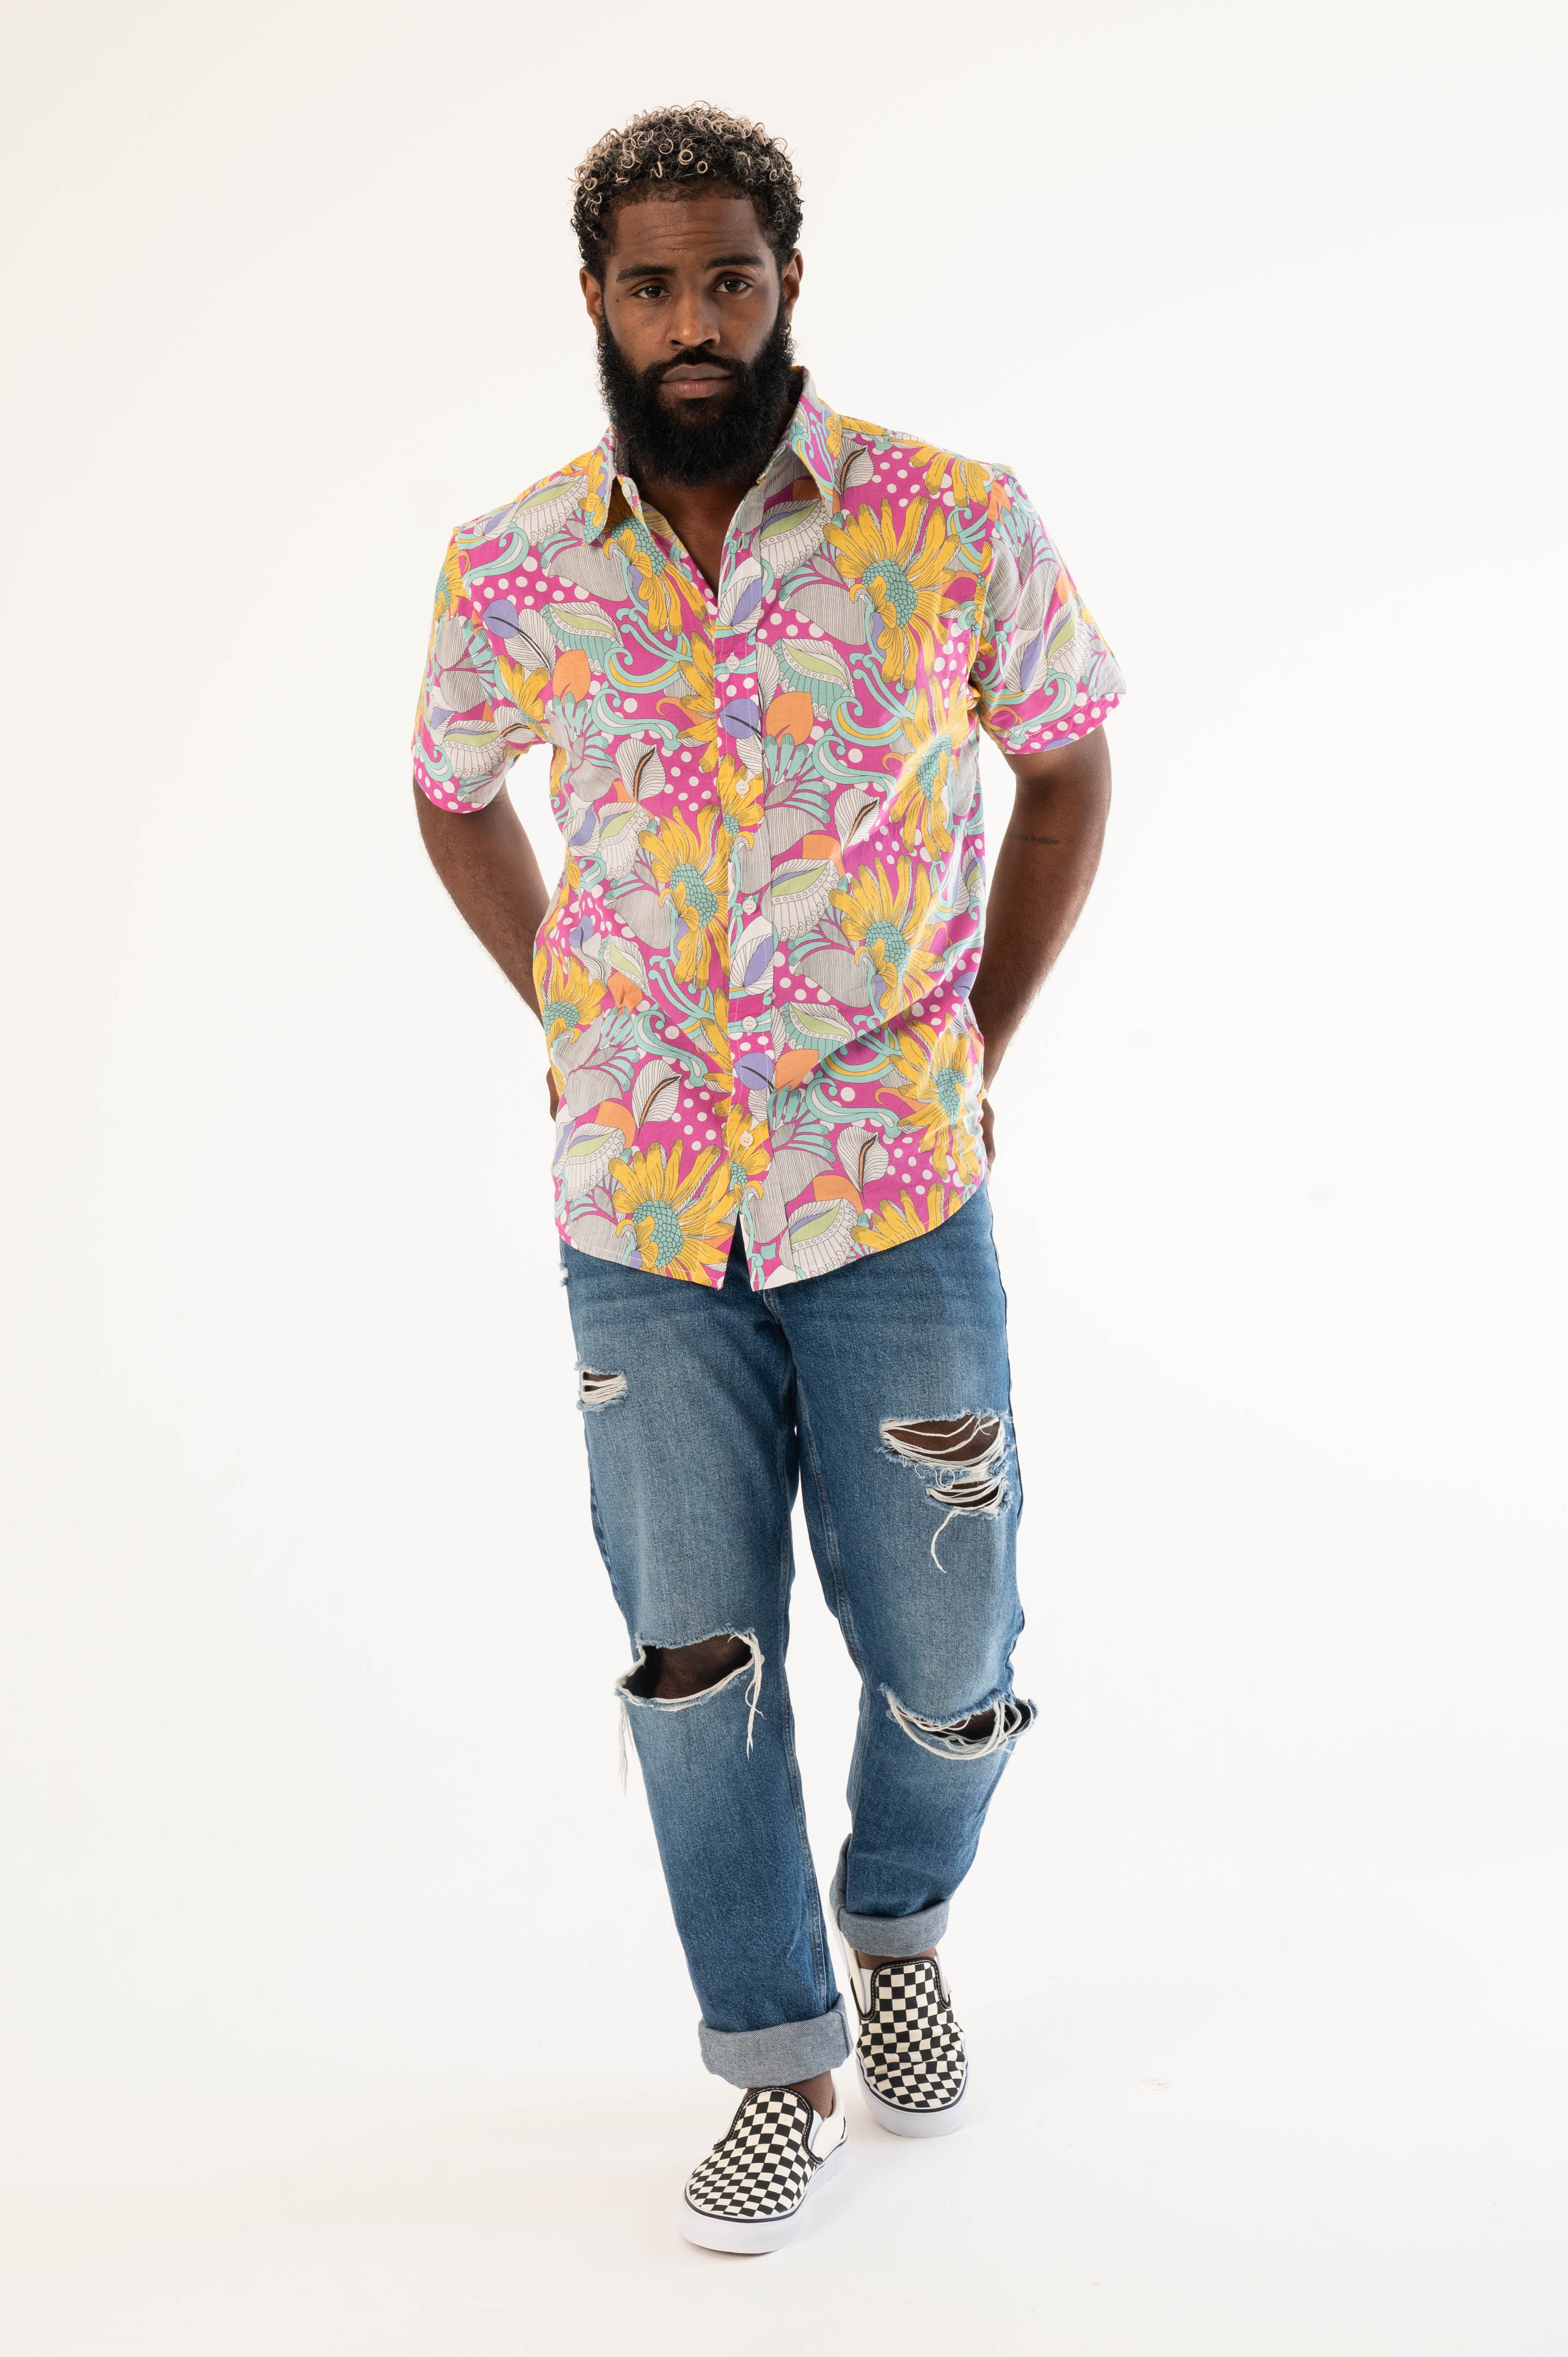 'The Sheril' Short Sleeve Shirt in Light Pink, Yellow and White (La Brea) Floral Print